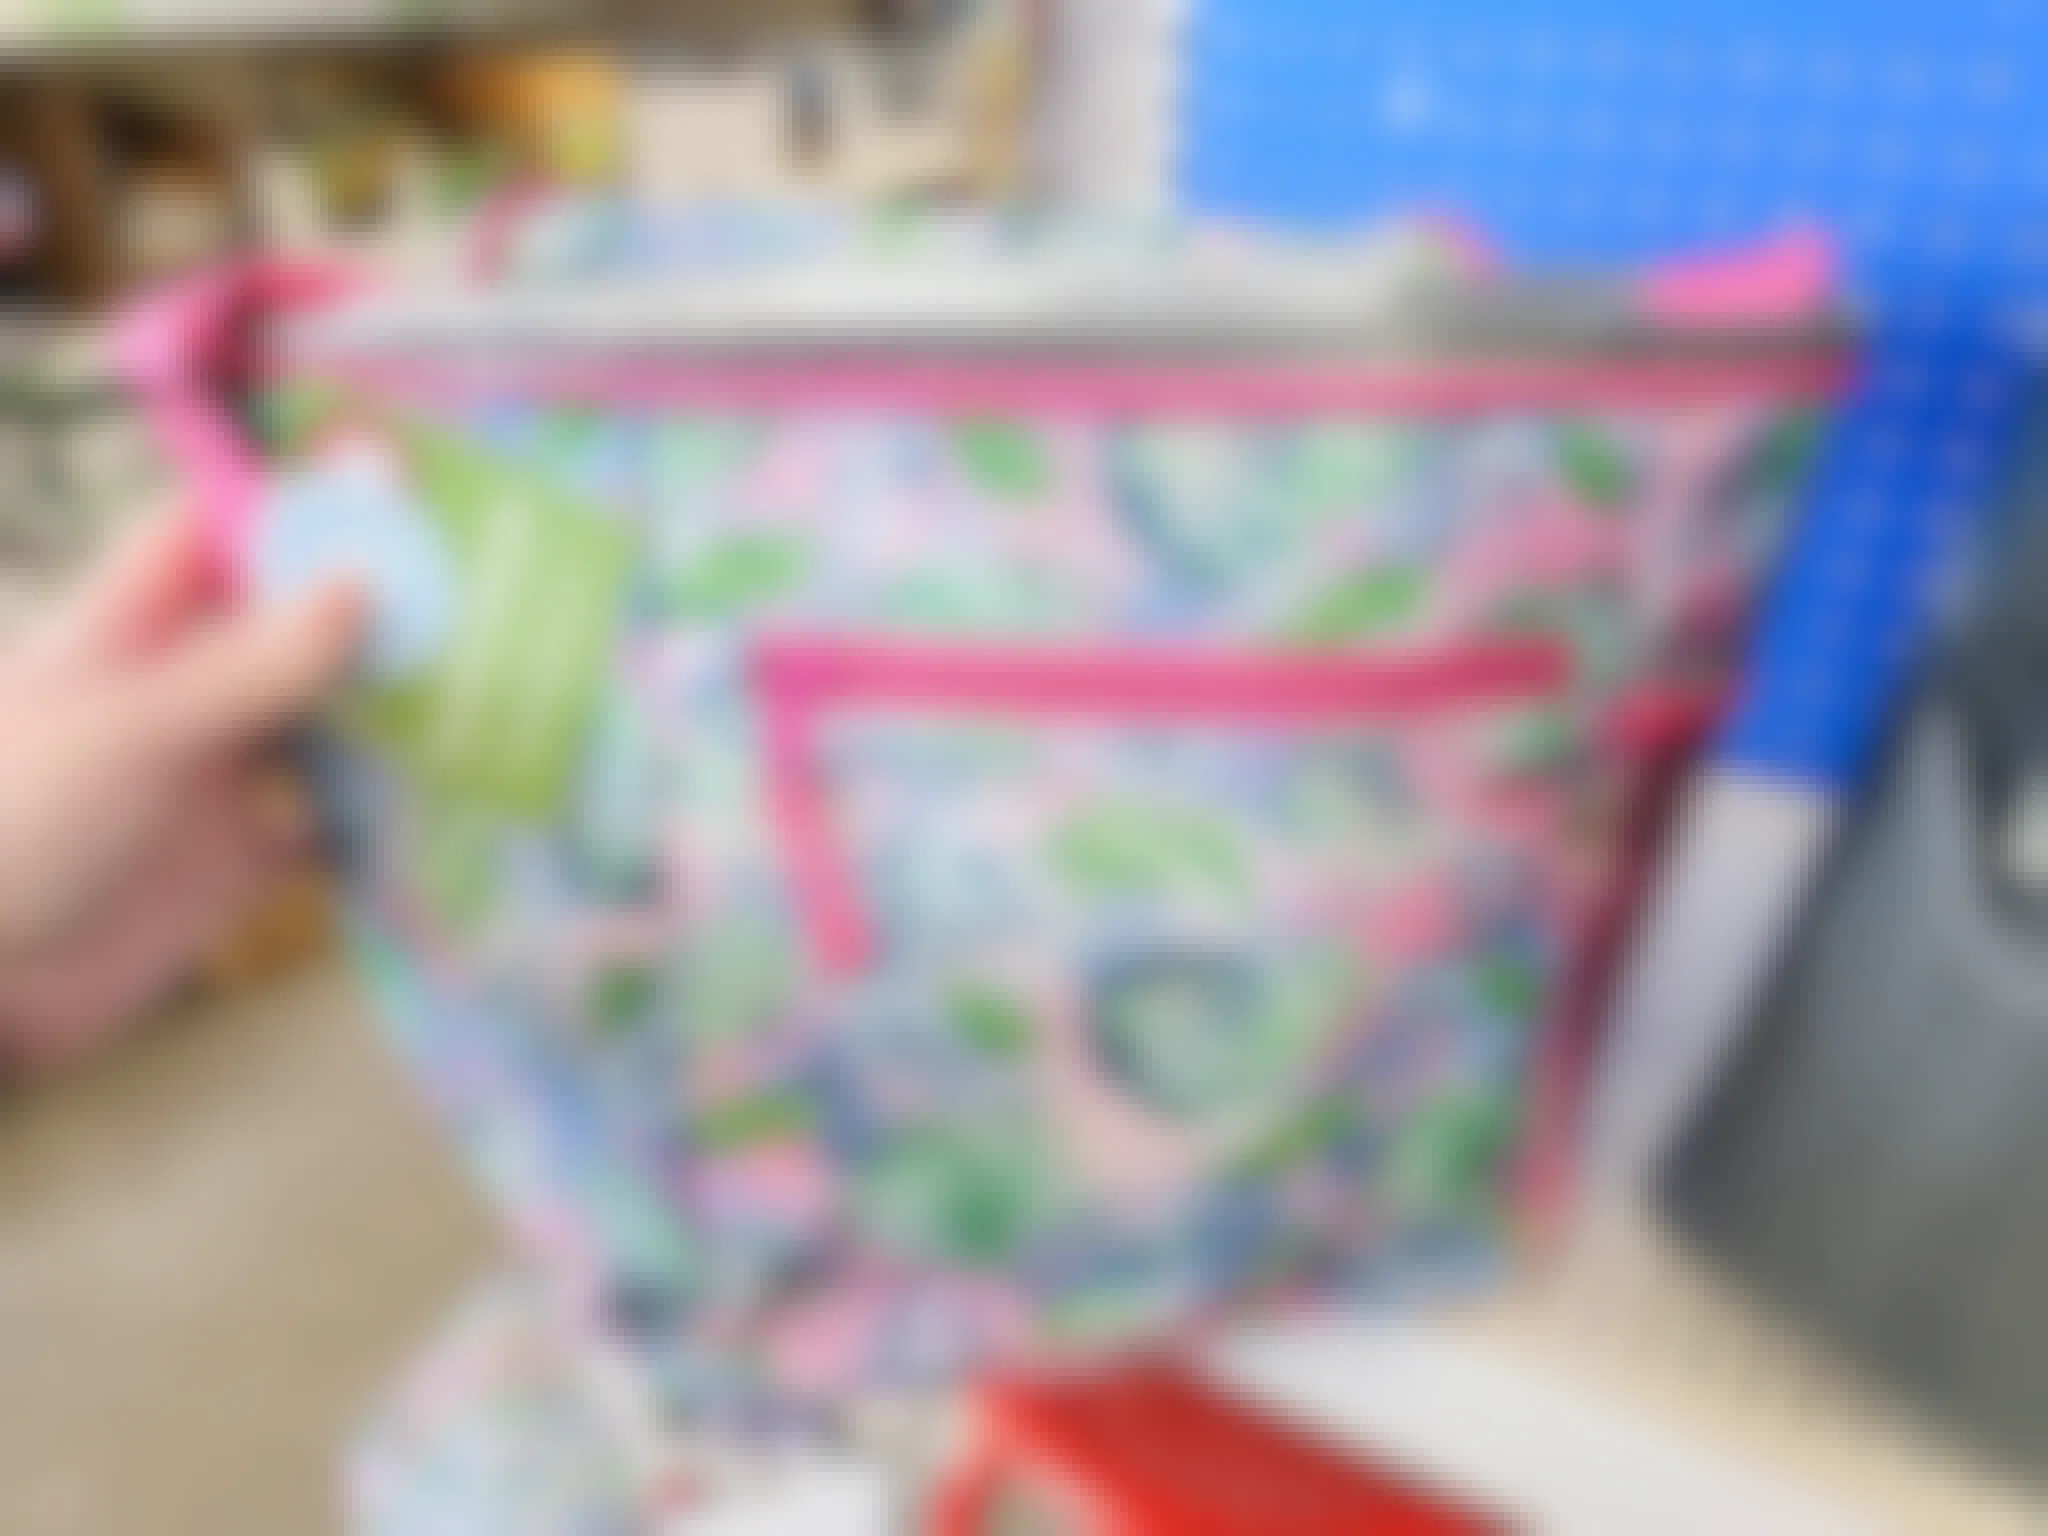 floral insulated cooler